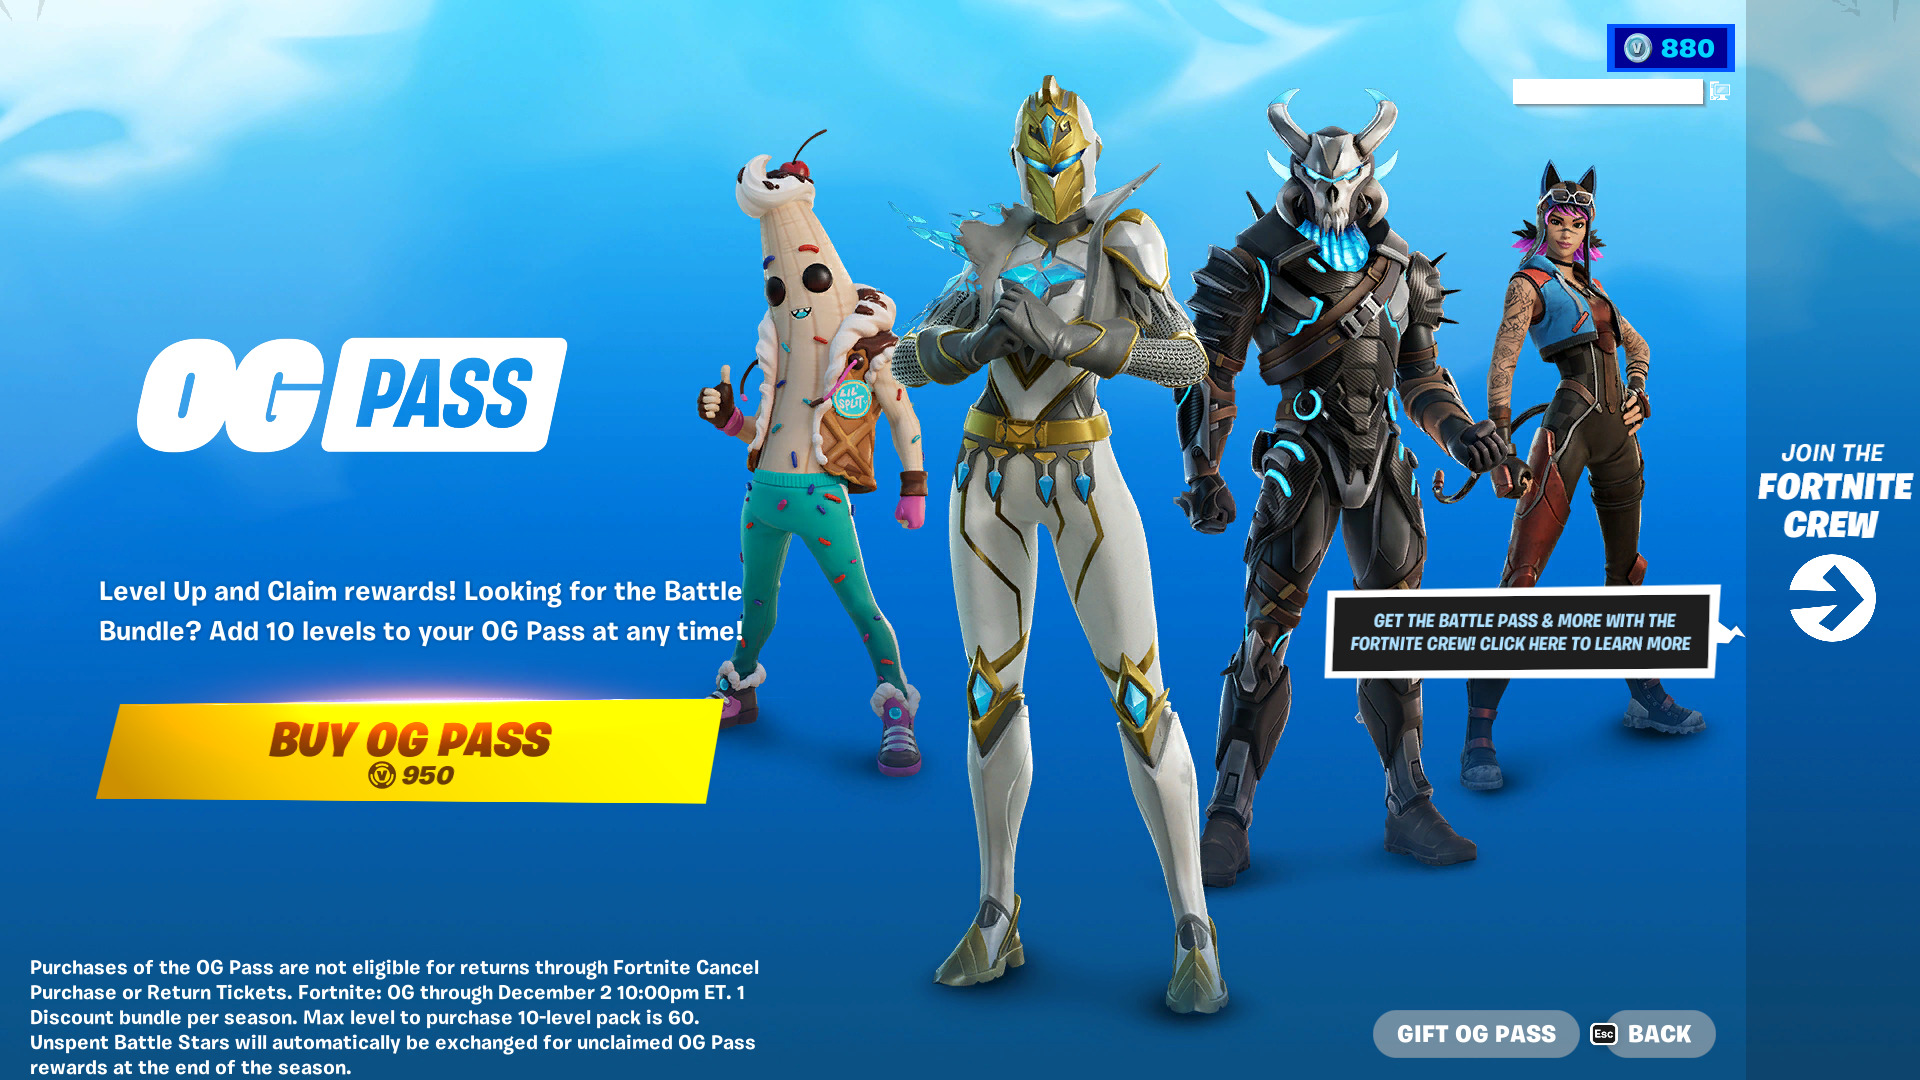 Fortnite OG Battle Pass: All Outfits and rewards in the 'OG Pass